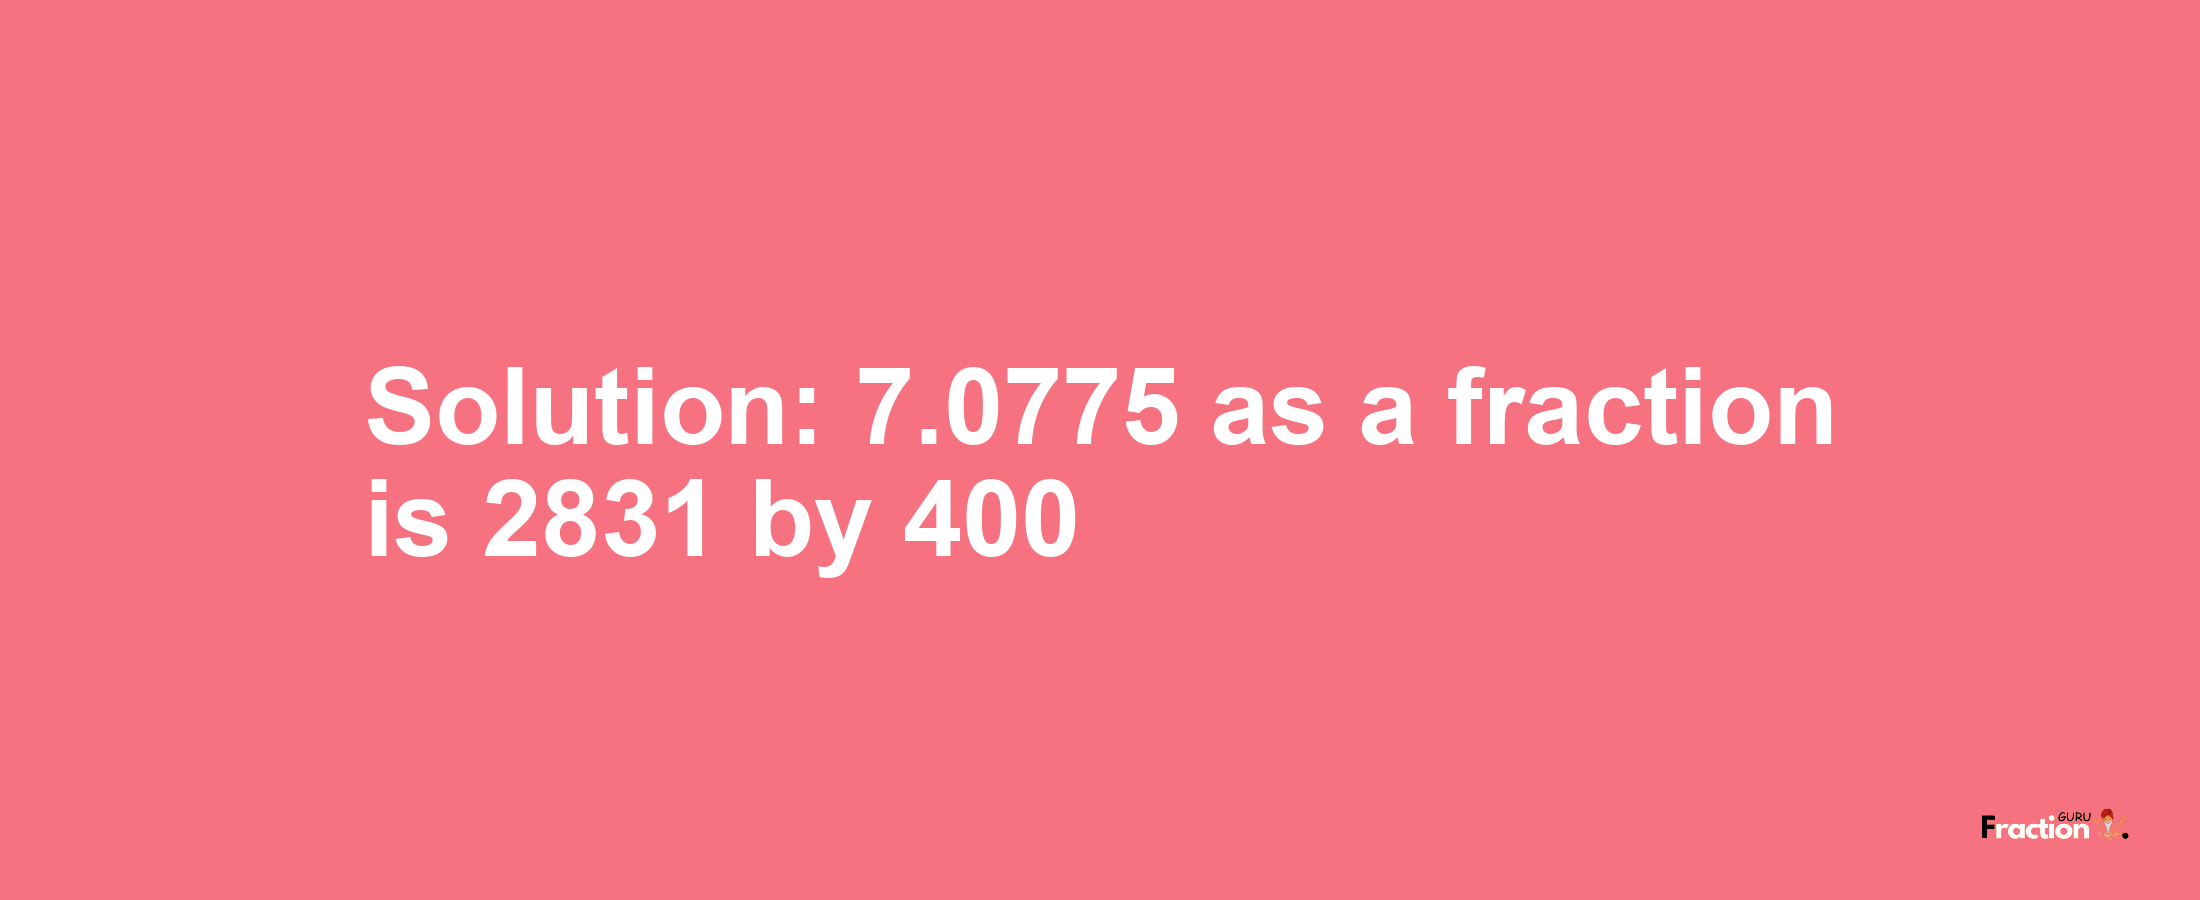 Solution:7.0775 as a fraction is 2831/400